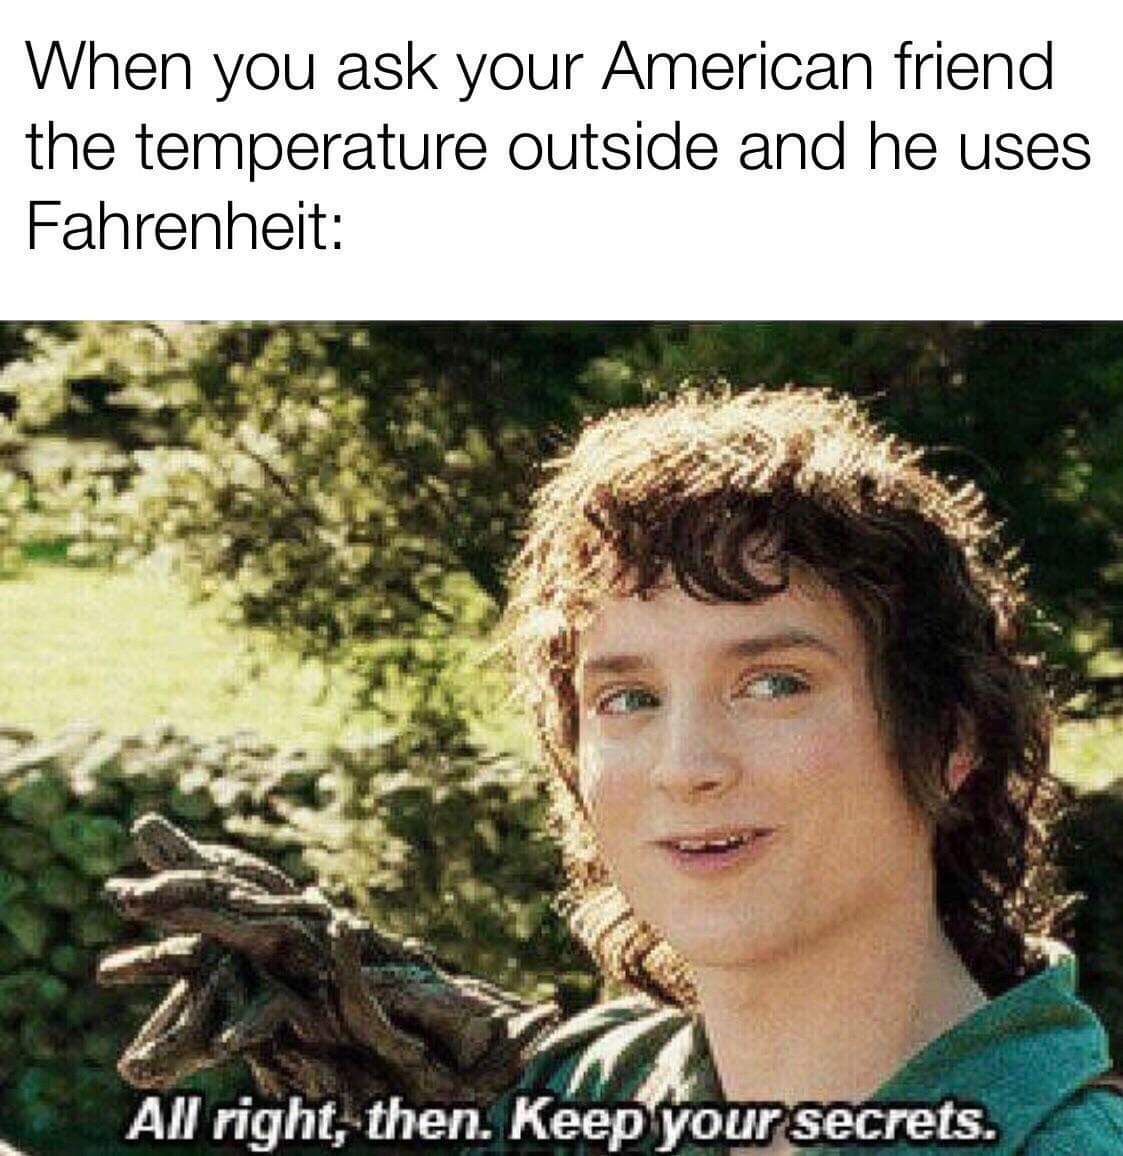 memes - alright then keep your secrets - When you ask your American friend the temperature outside and he uses Fahrenheit All right, then. Keep your secrets.